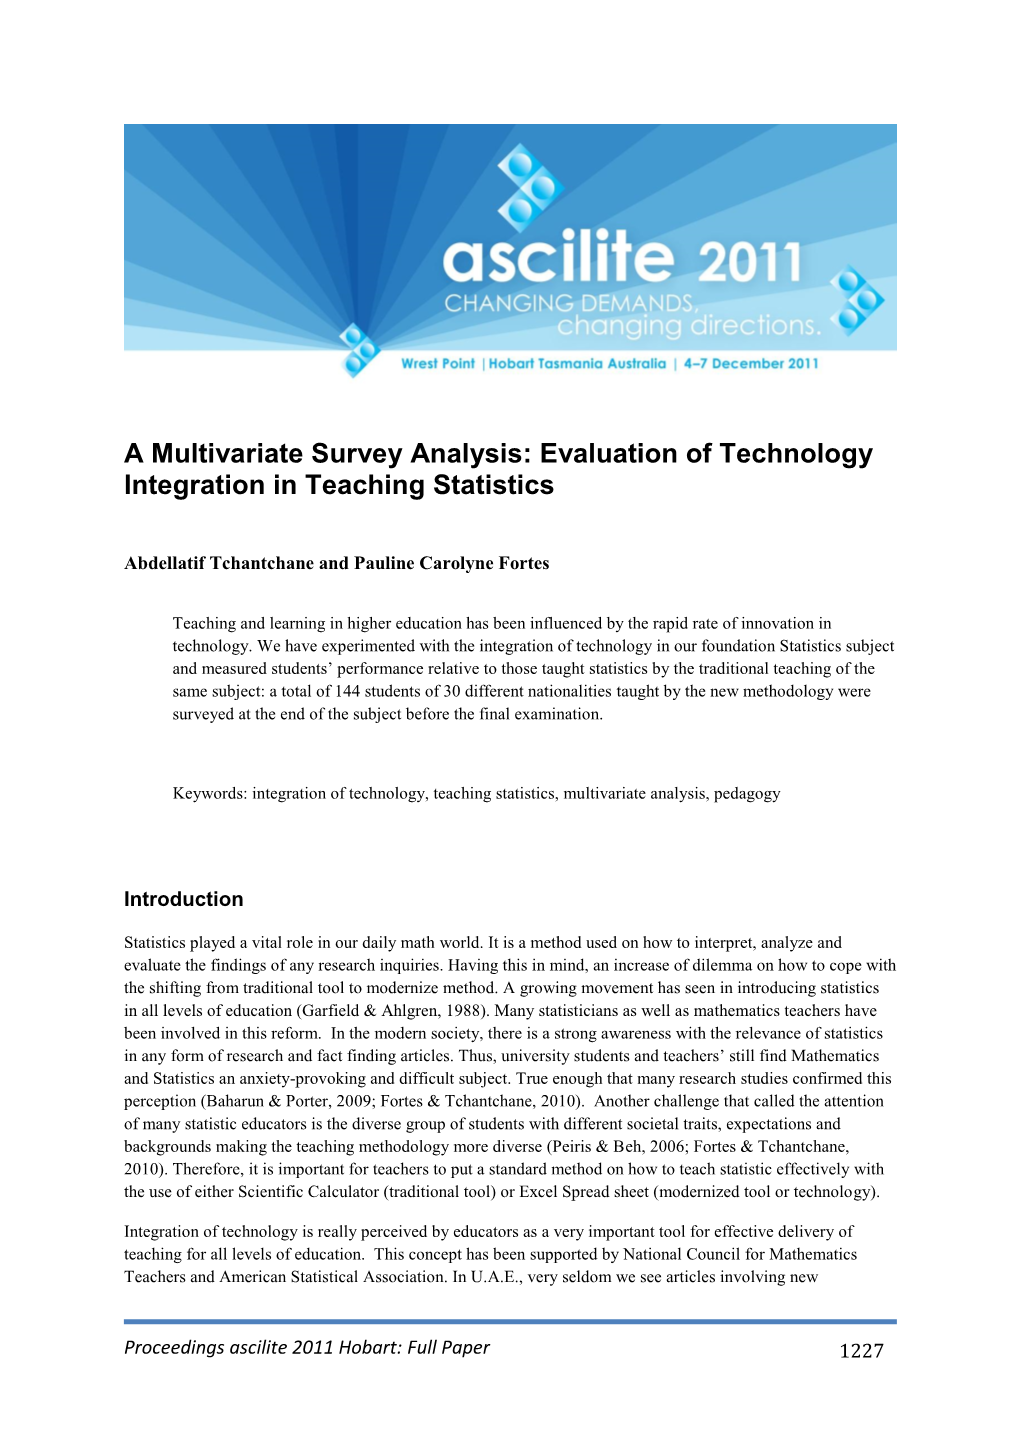 A Multivariate Survey Analysis: Evaluation of Technology Integration in Teaching Statistics